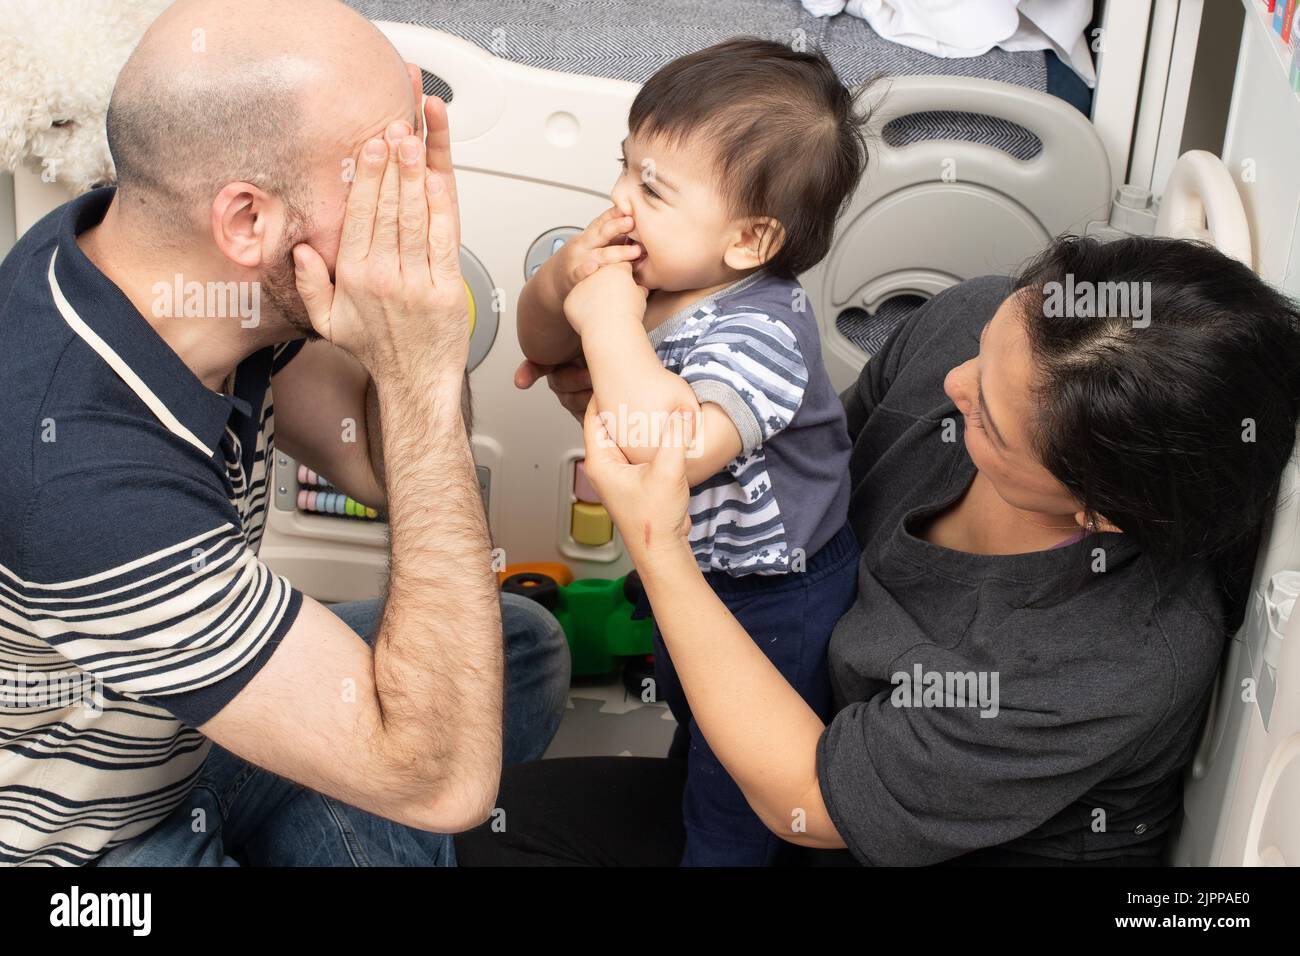 11 month old baby boy at home playing peek a boo with parents Stock Photo